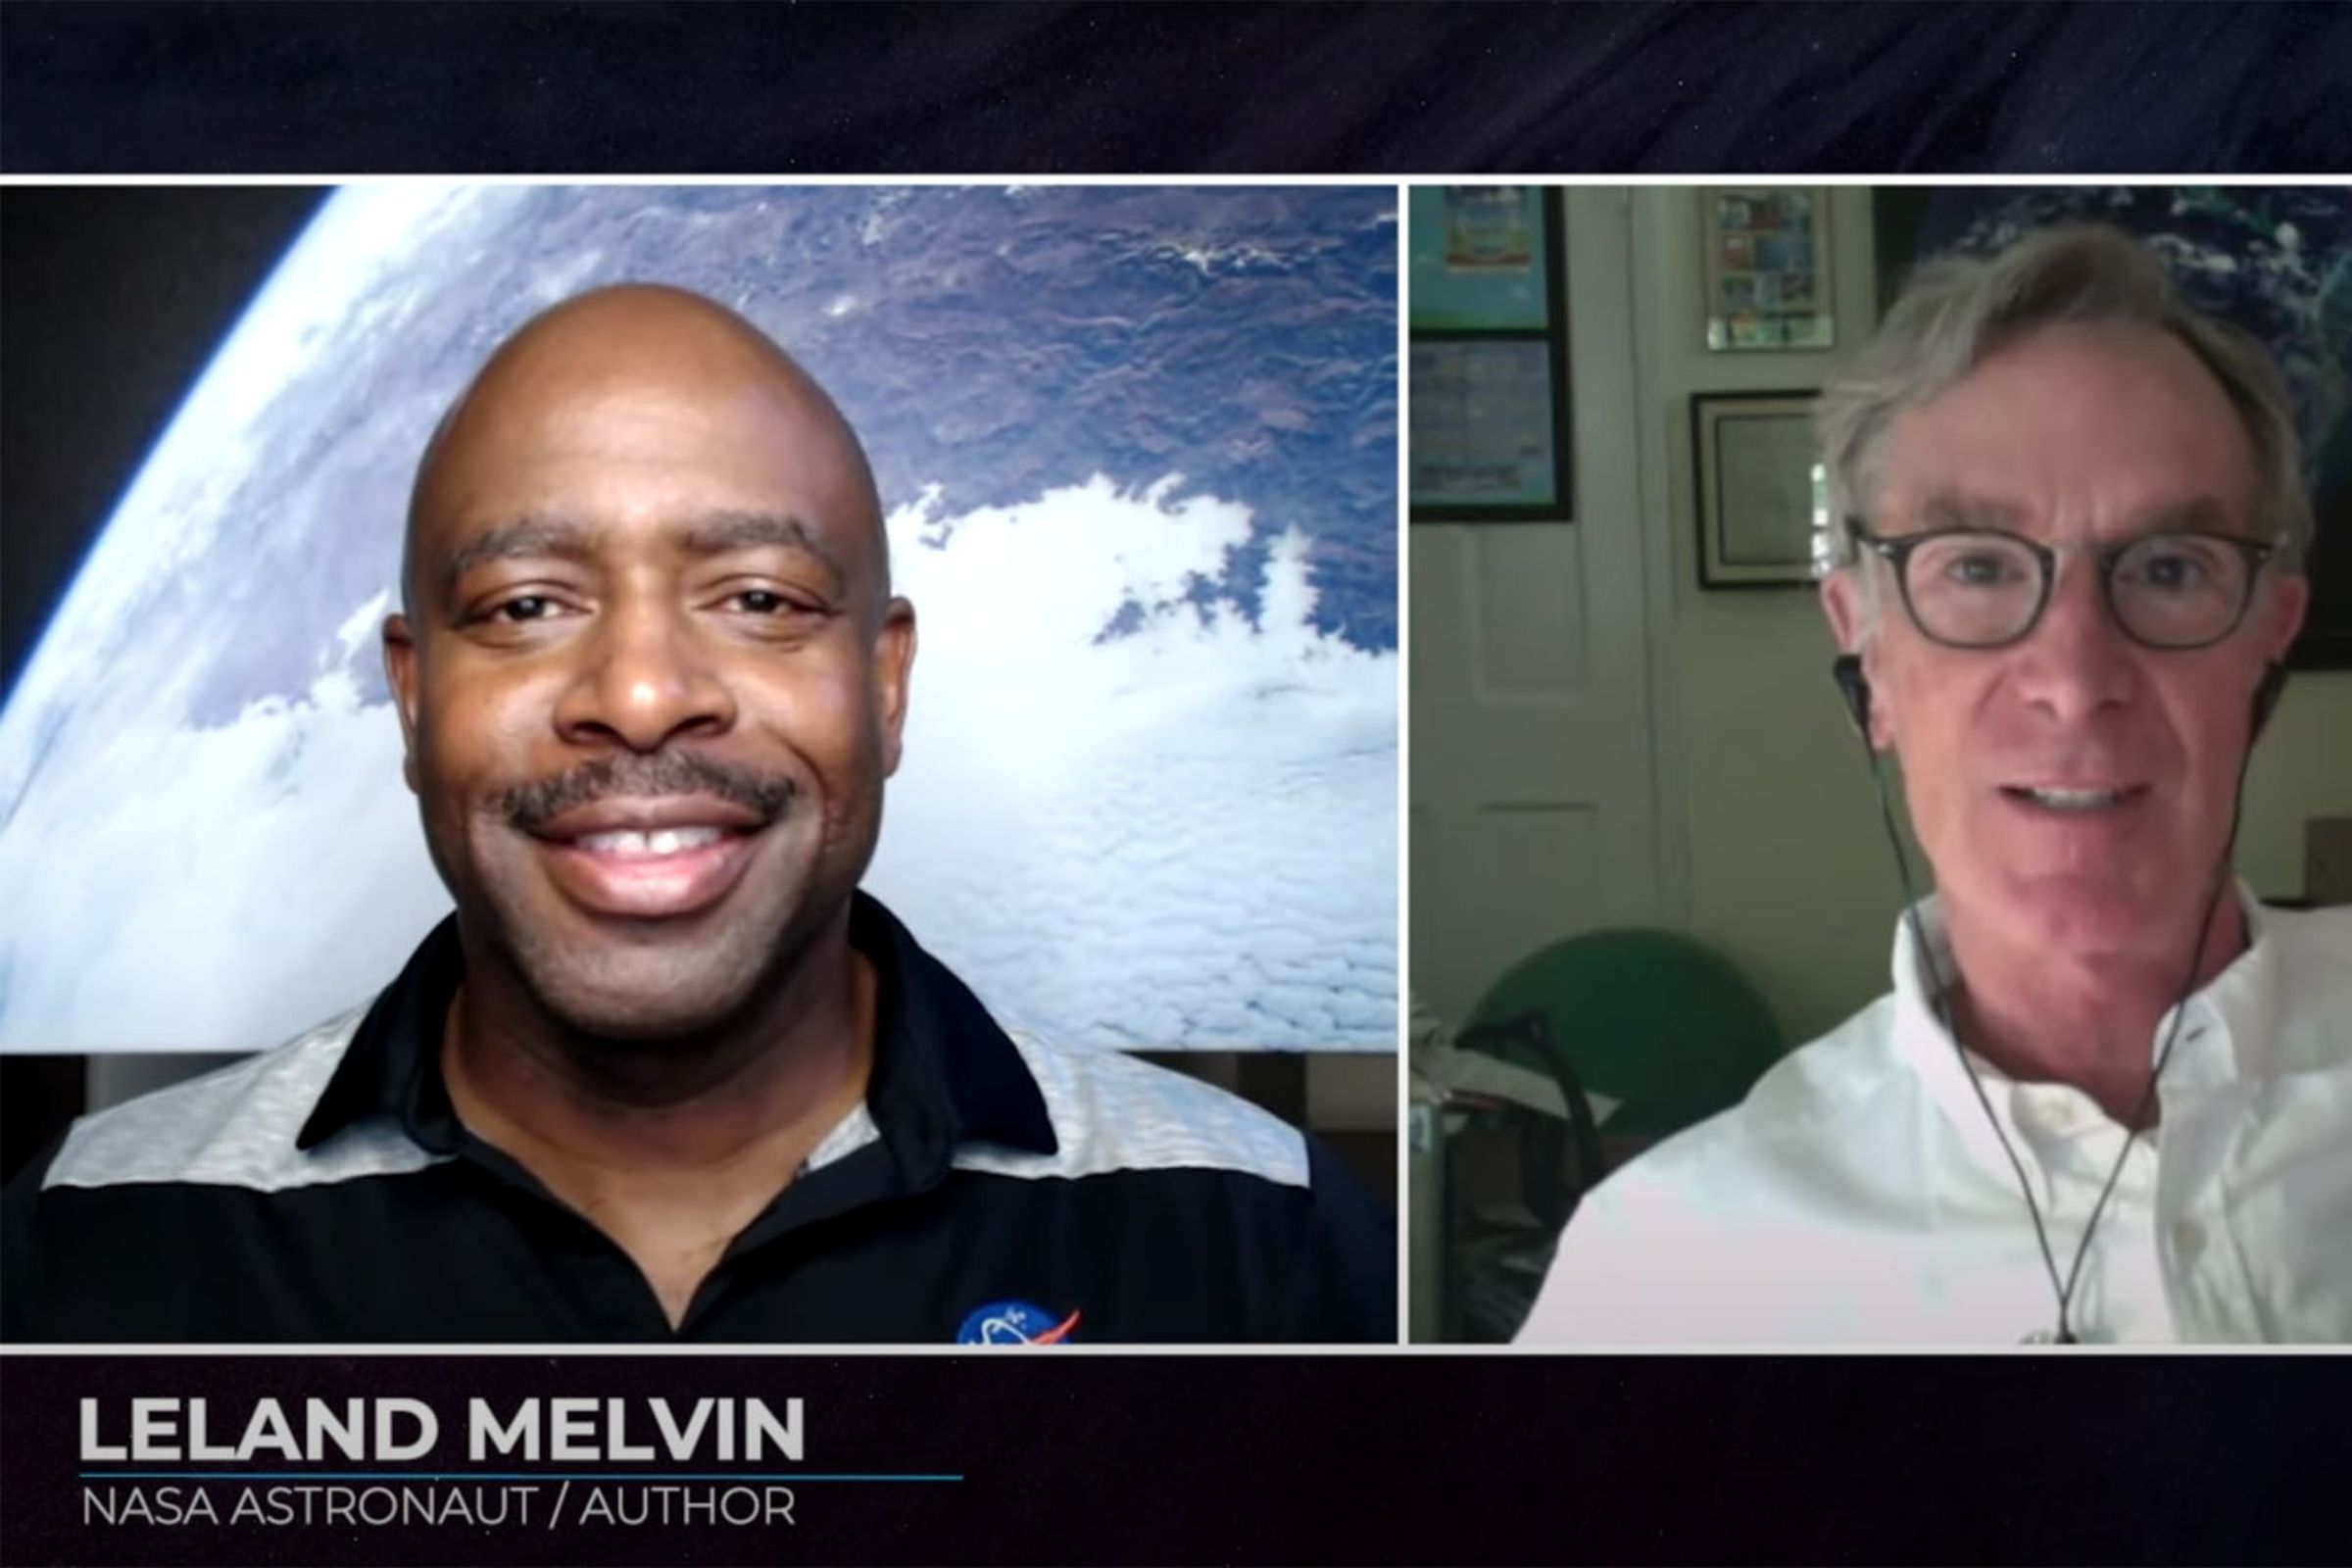 Leland Melvin and Bill Nye on a video call